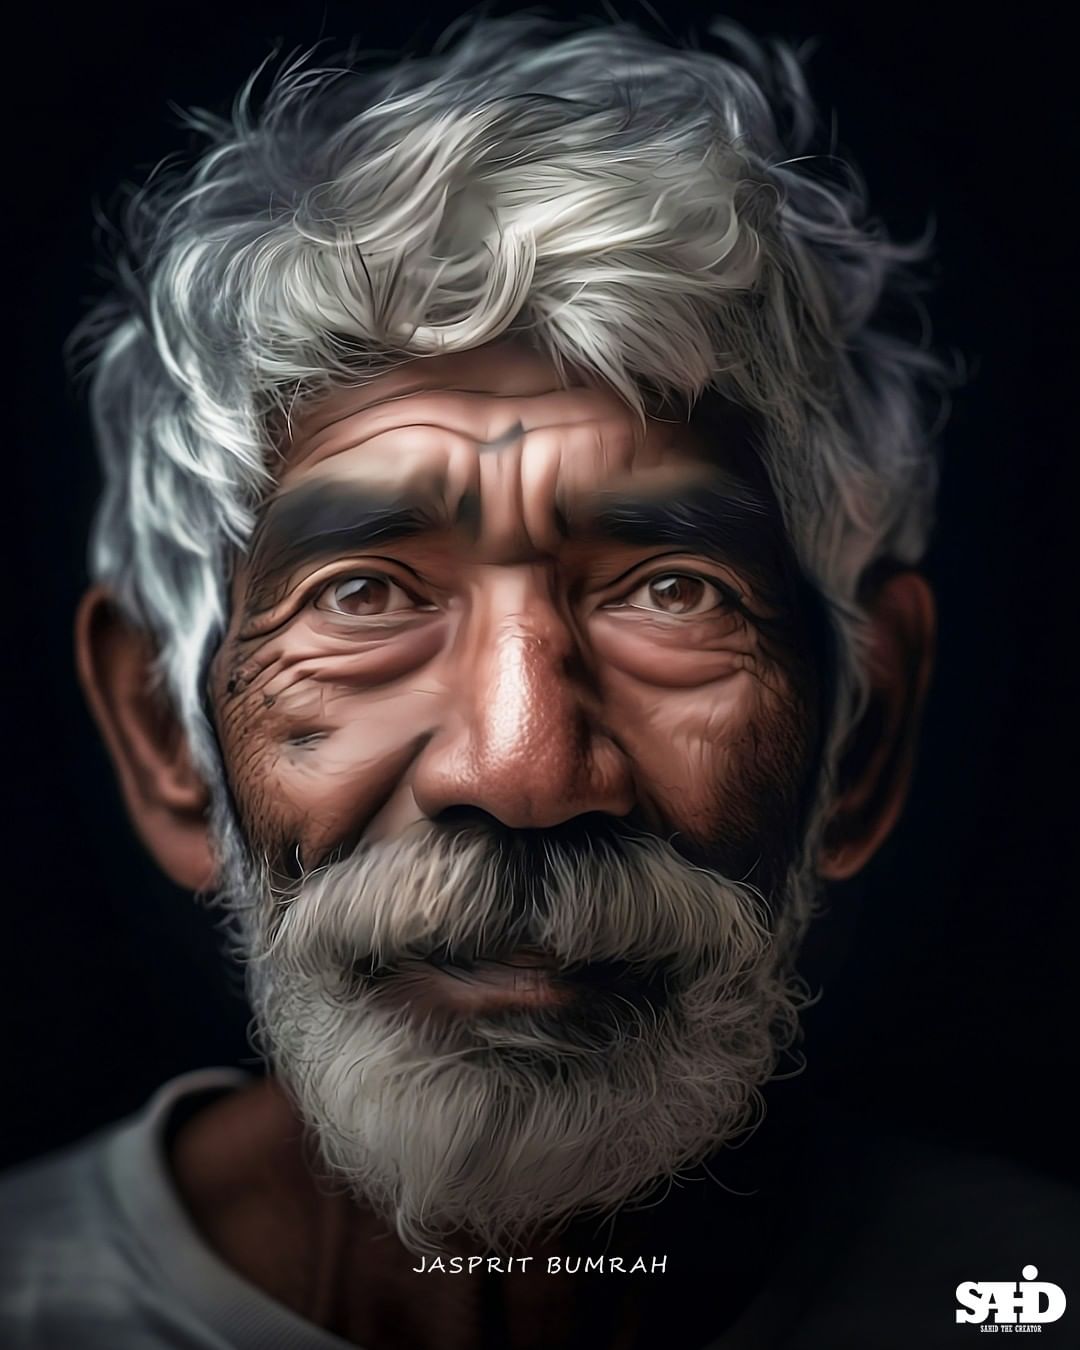 Cricketers as elderly men | AI Images of Indian Cricketers | KreedOn